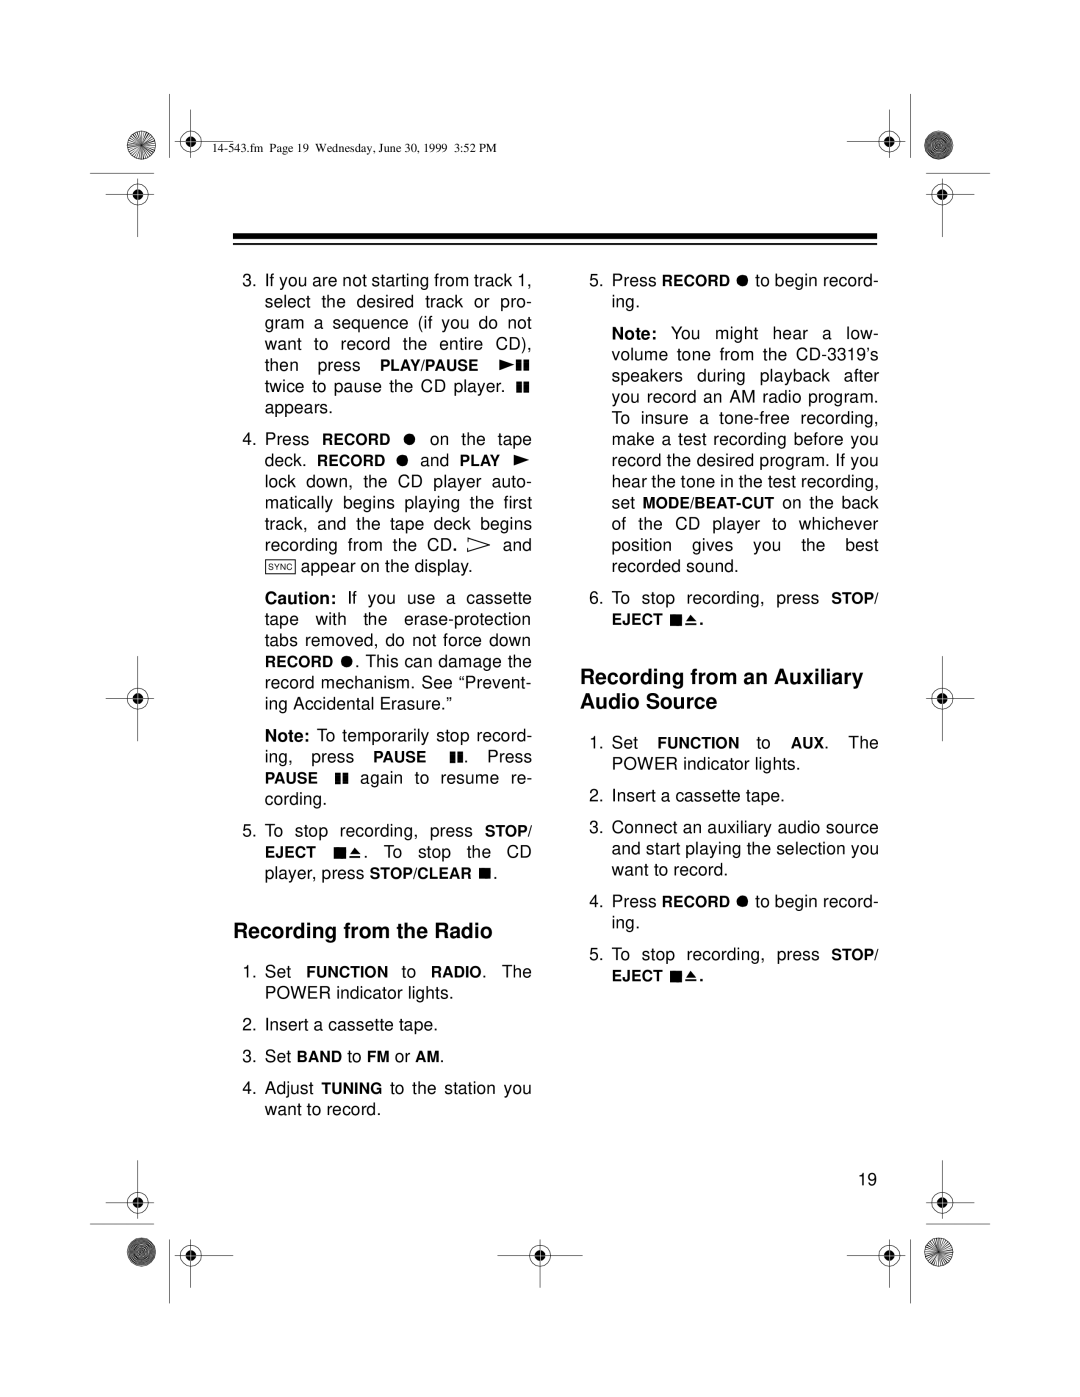 Radio Shack CD-3319 owner manual Recording from the Radio, Recording from an Auxiliary Audio Source 